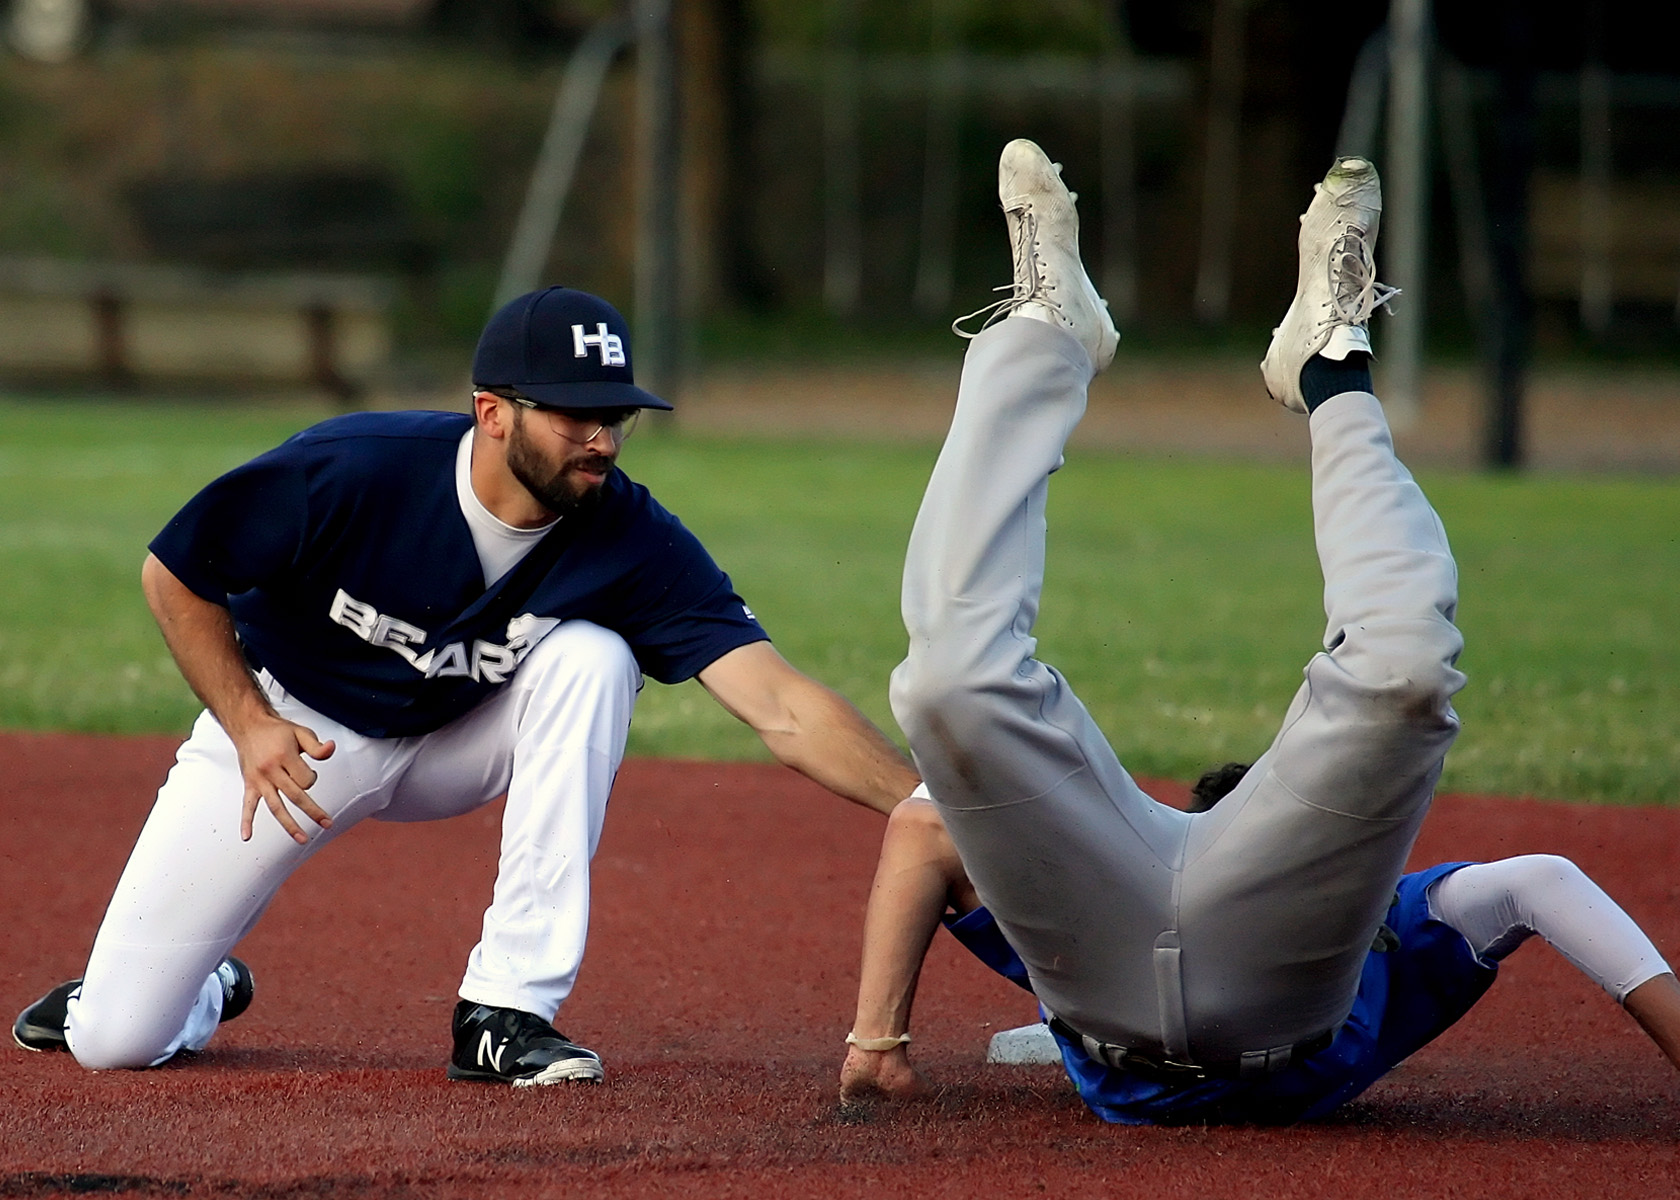 Colton Robinson of the Bears tags the Emeralds Sam Linscott out as he performs a graceful scorpion slide into second base.